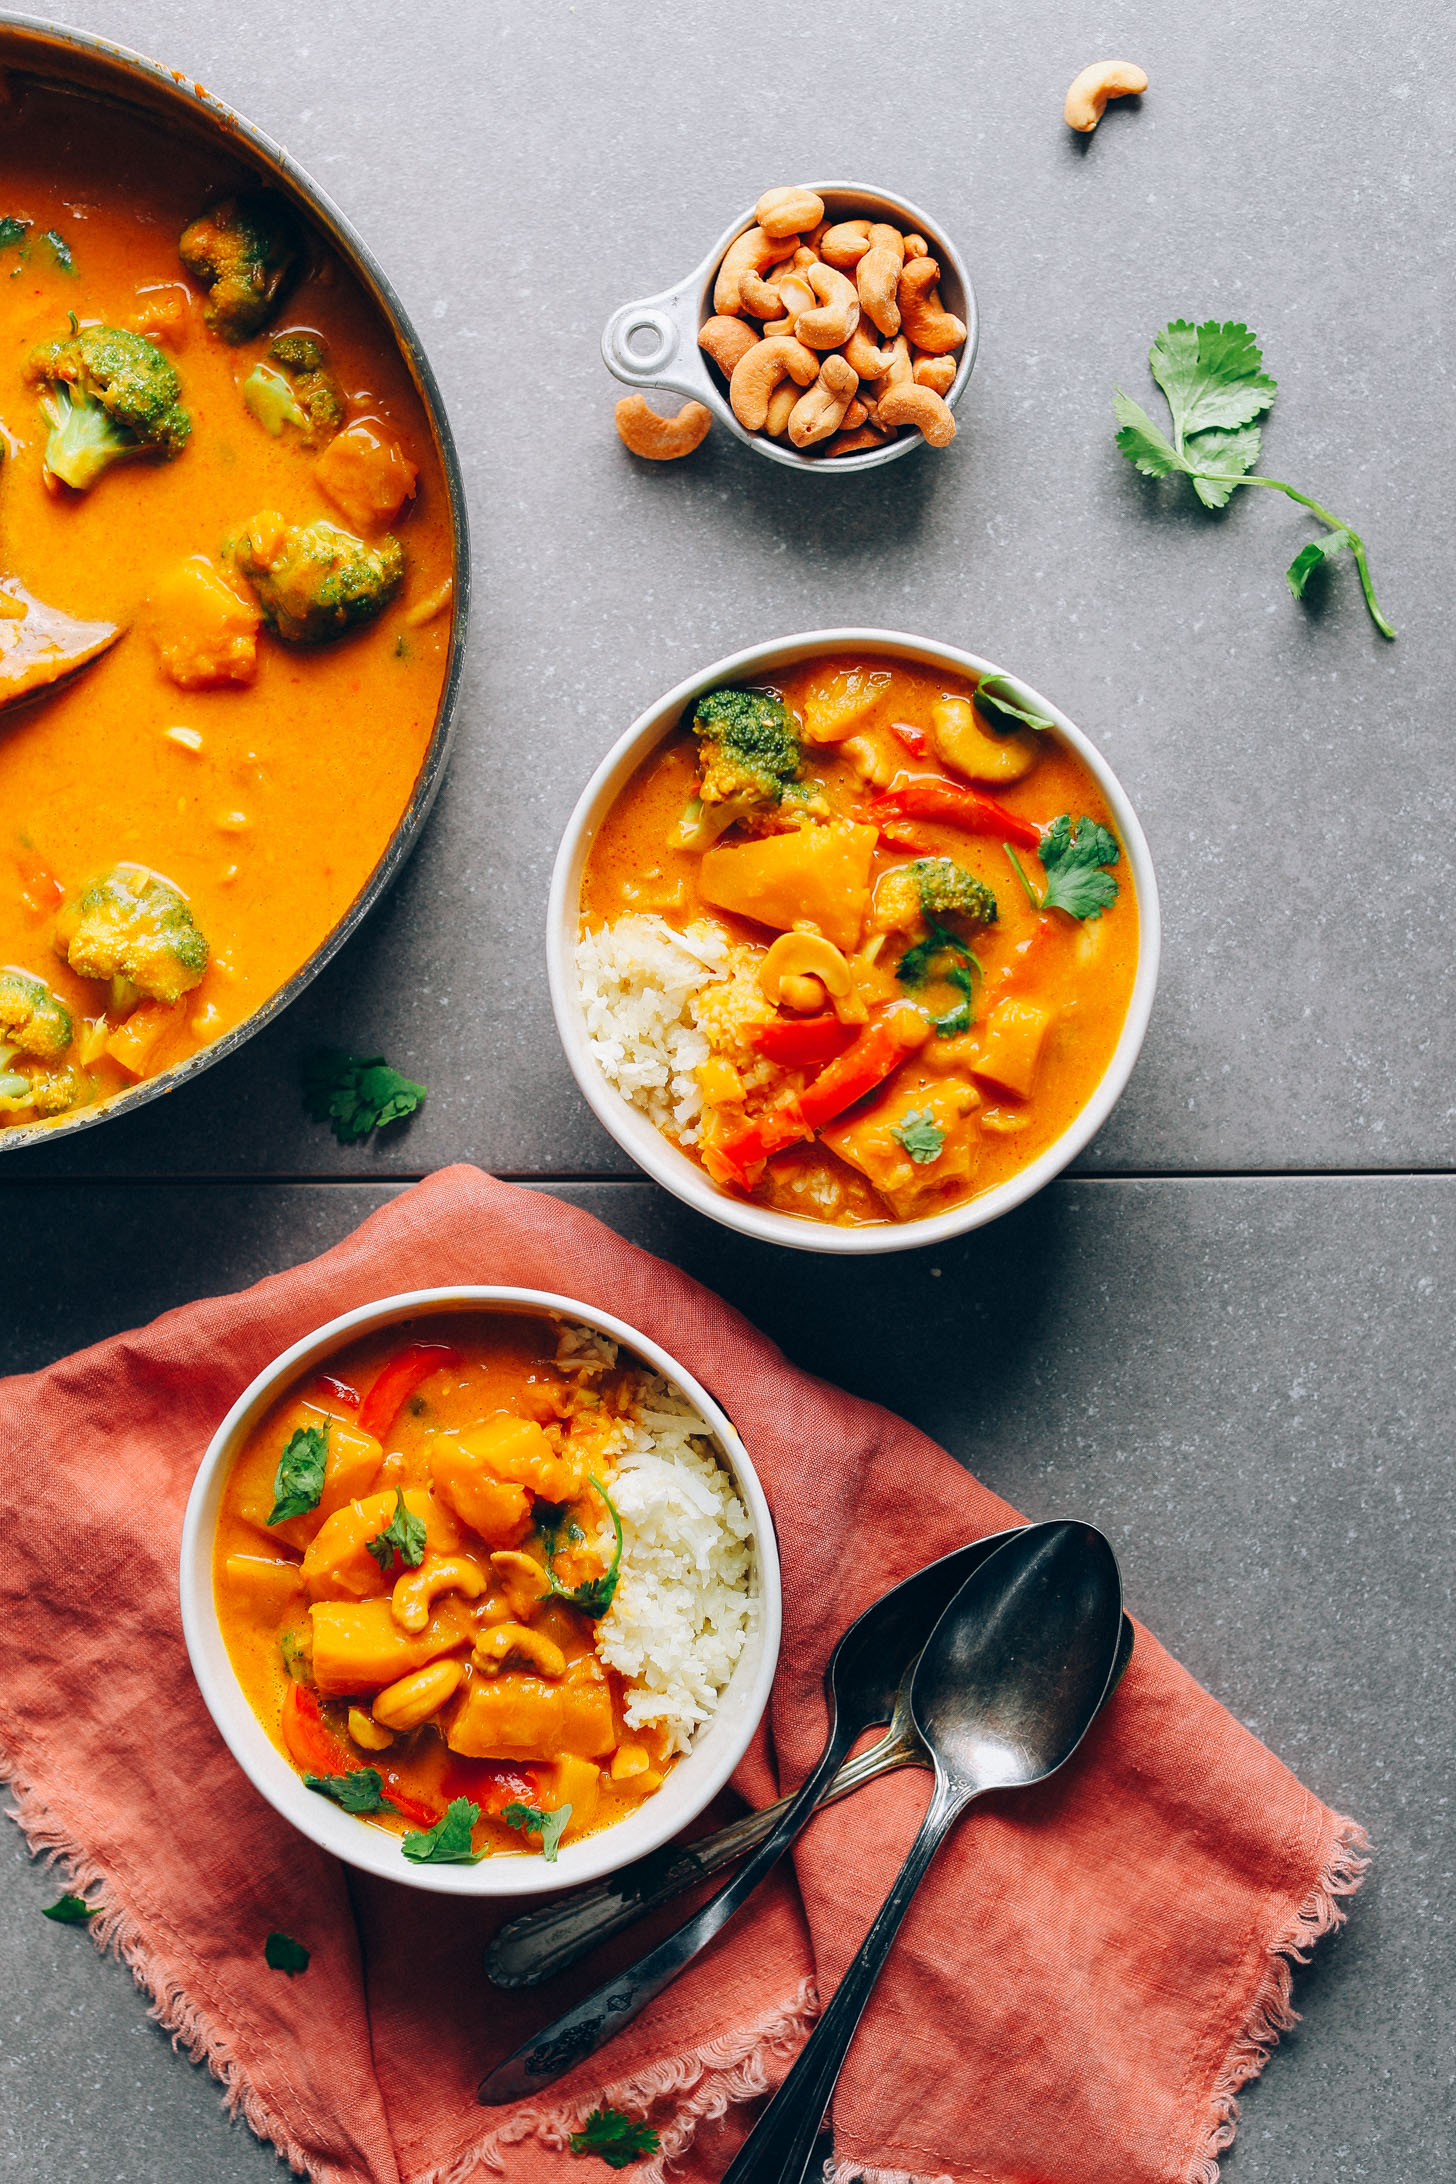 Two bowls of rice and Yellow Pumpkin Curry with a side of cashews for garnishing